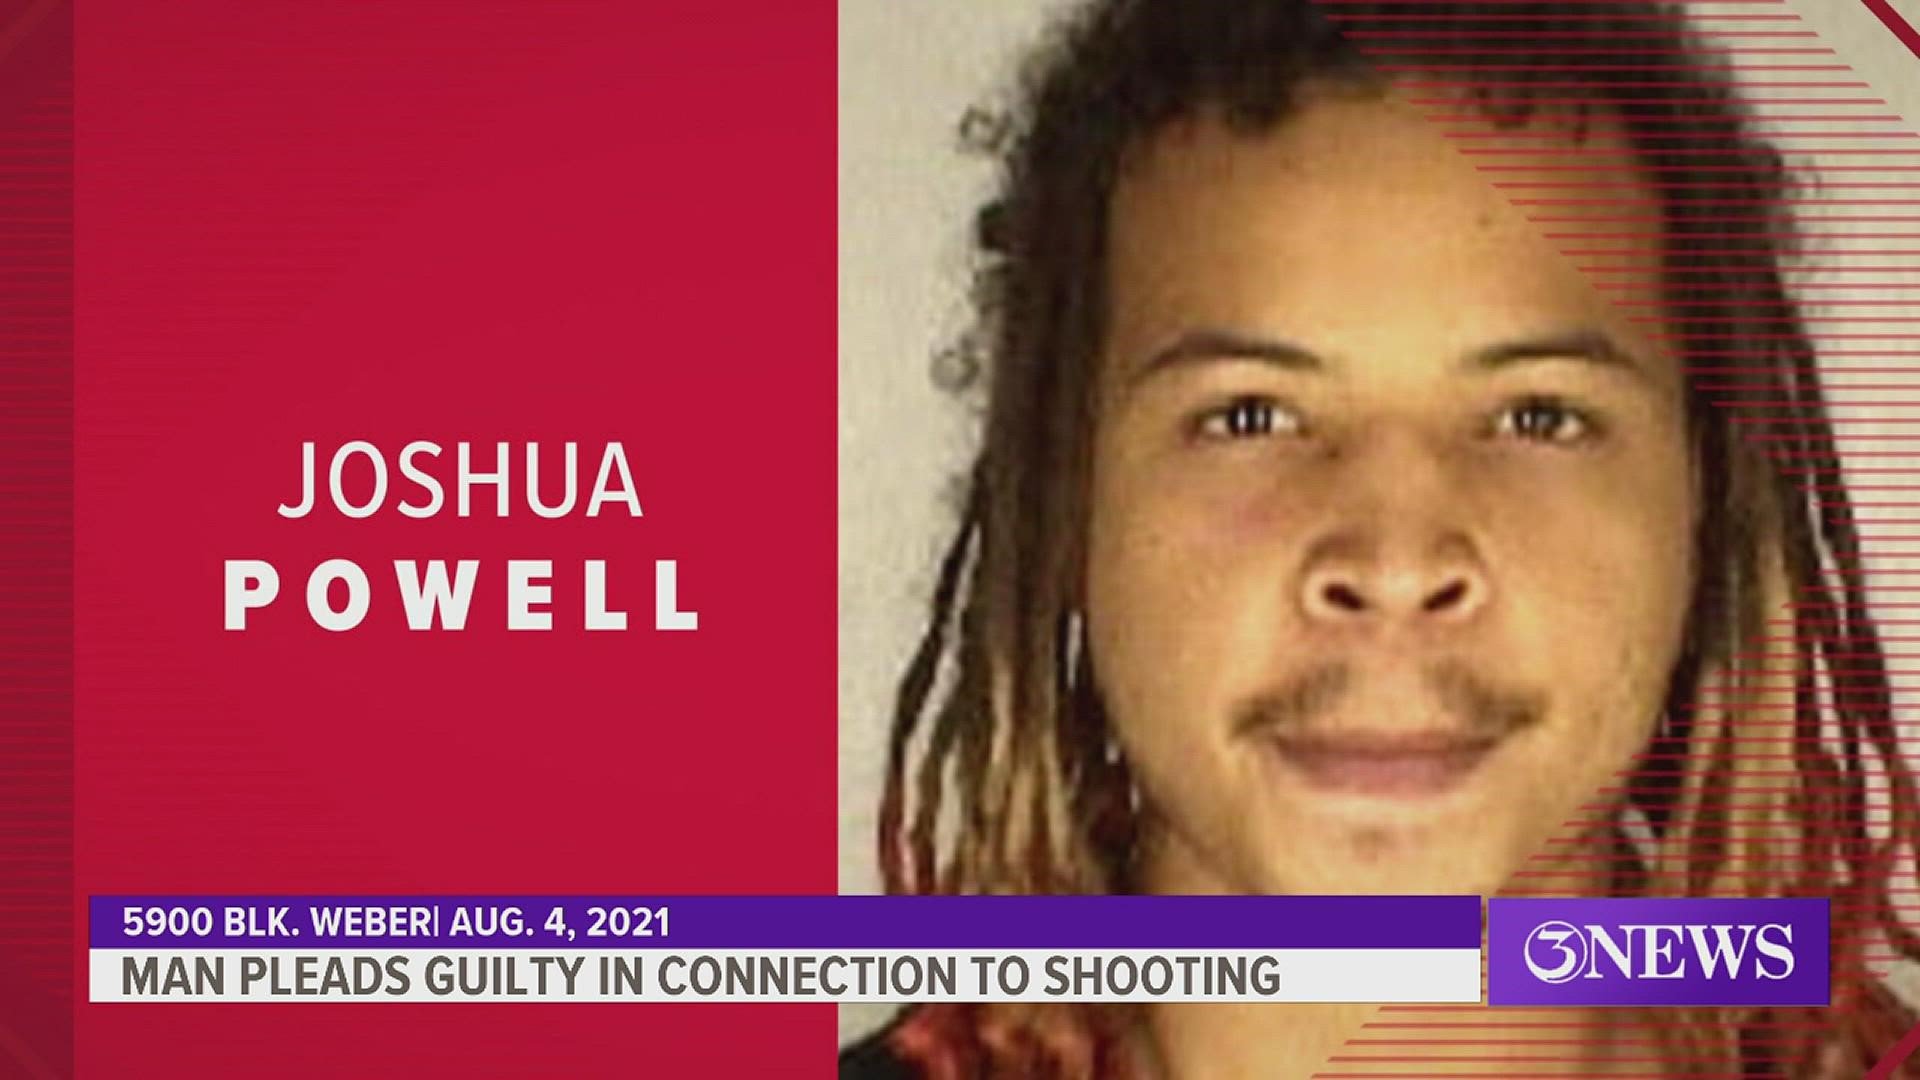 Powell was accused of opening fire on police officers responding to a Corpus Christi disturbance call in August 2021.